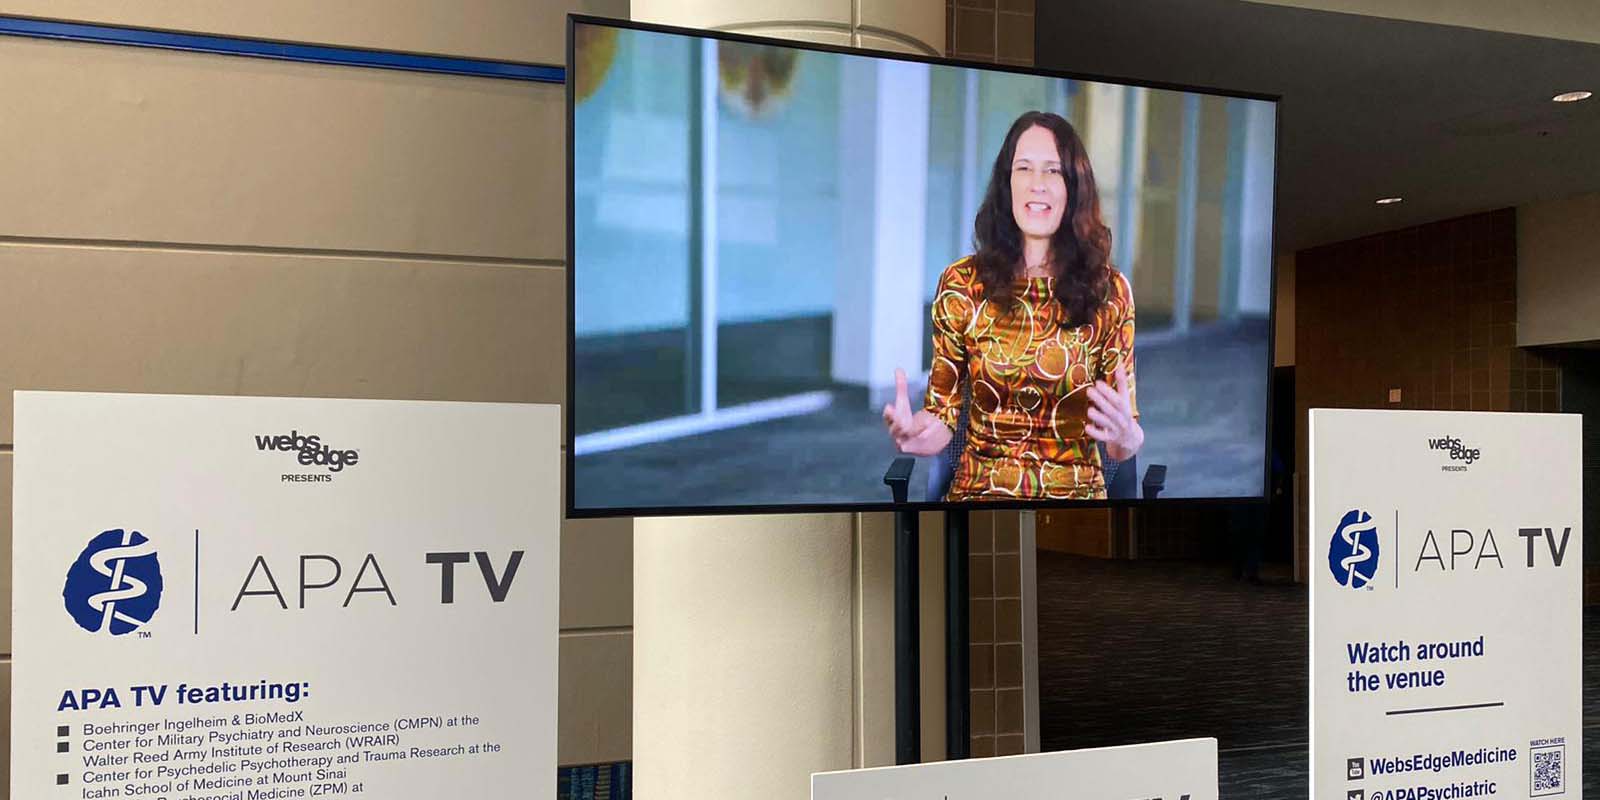 A flatscreen TV is hung on a pillar in what looks like a hotel lobby. On the screen, Erin is in the middle of talking. She is Caucasian with long, wavy brown hair and is wearing a shiny brown, orange and green desk. There are signs to the left and right of the TV that say 'APA TV.'